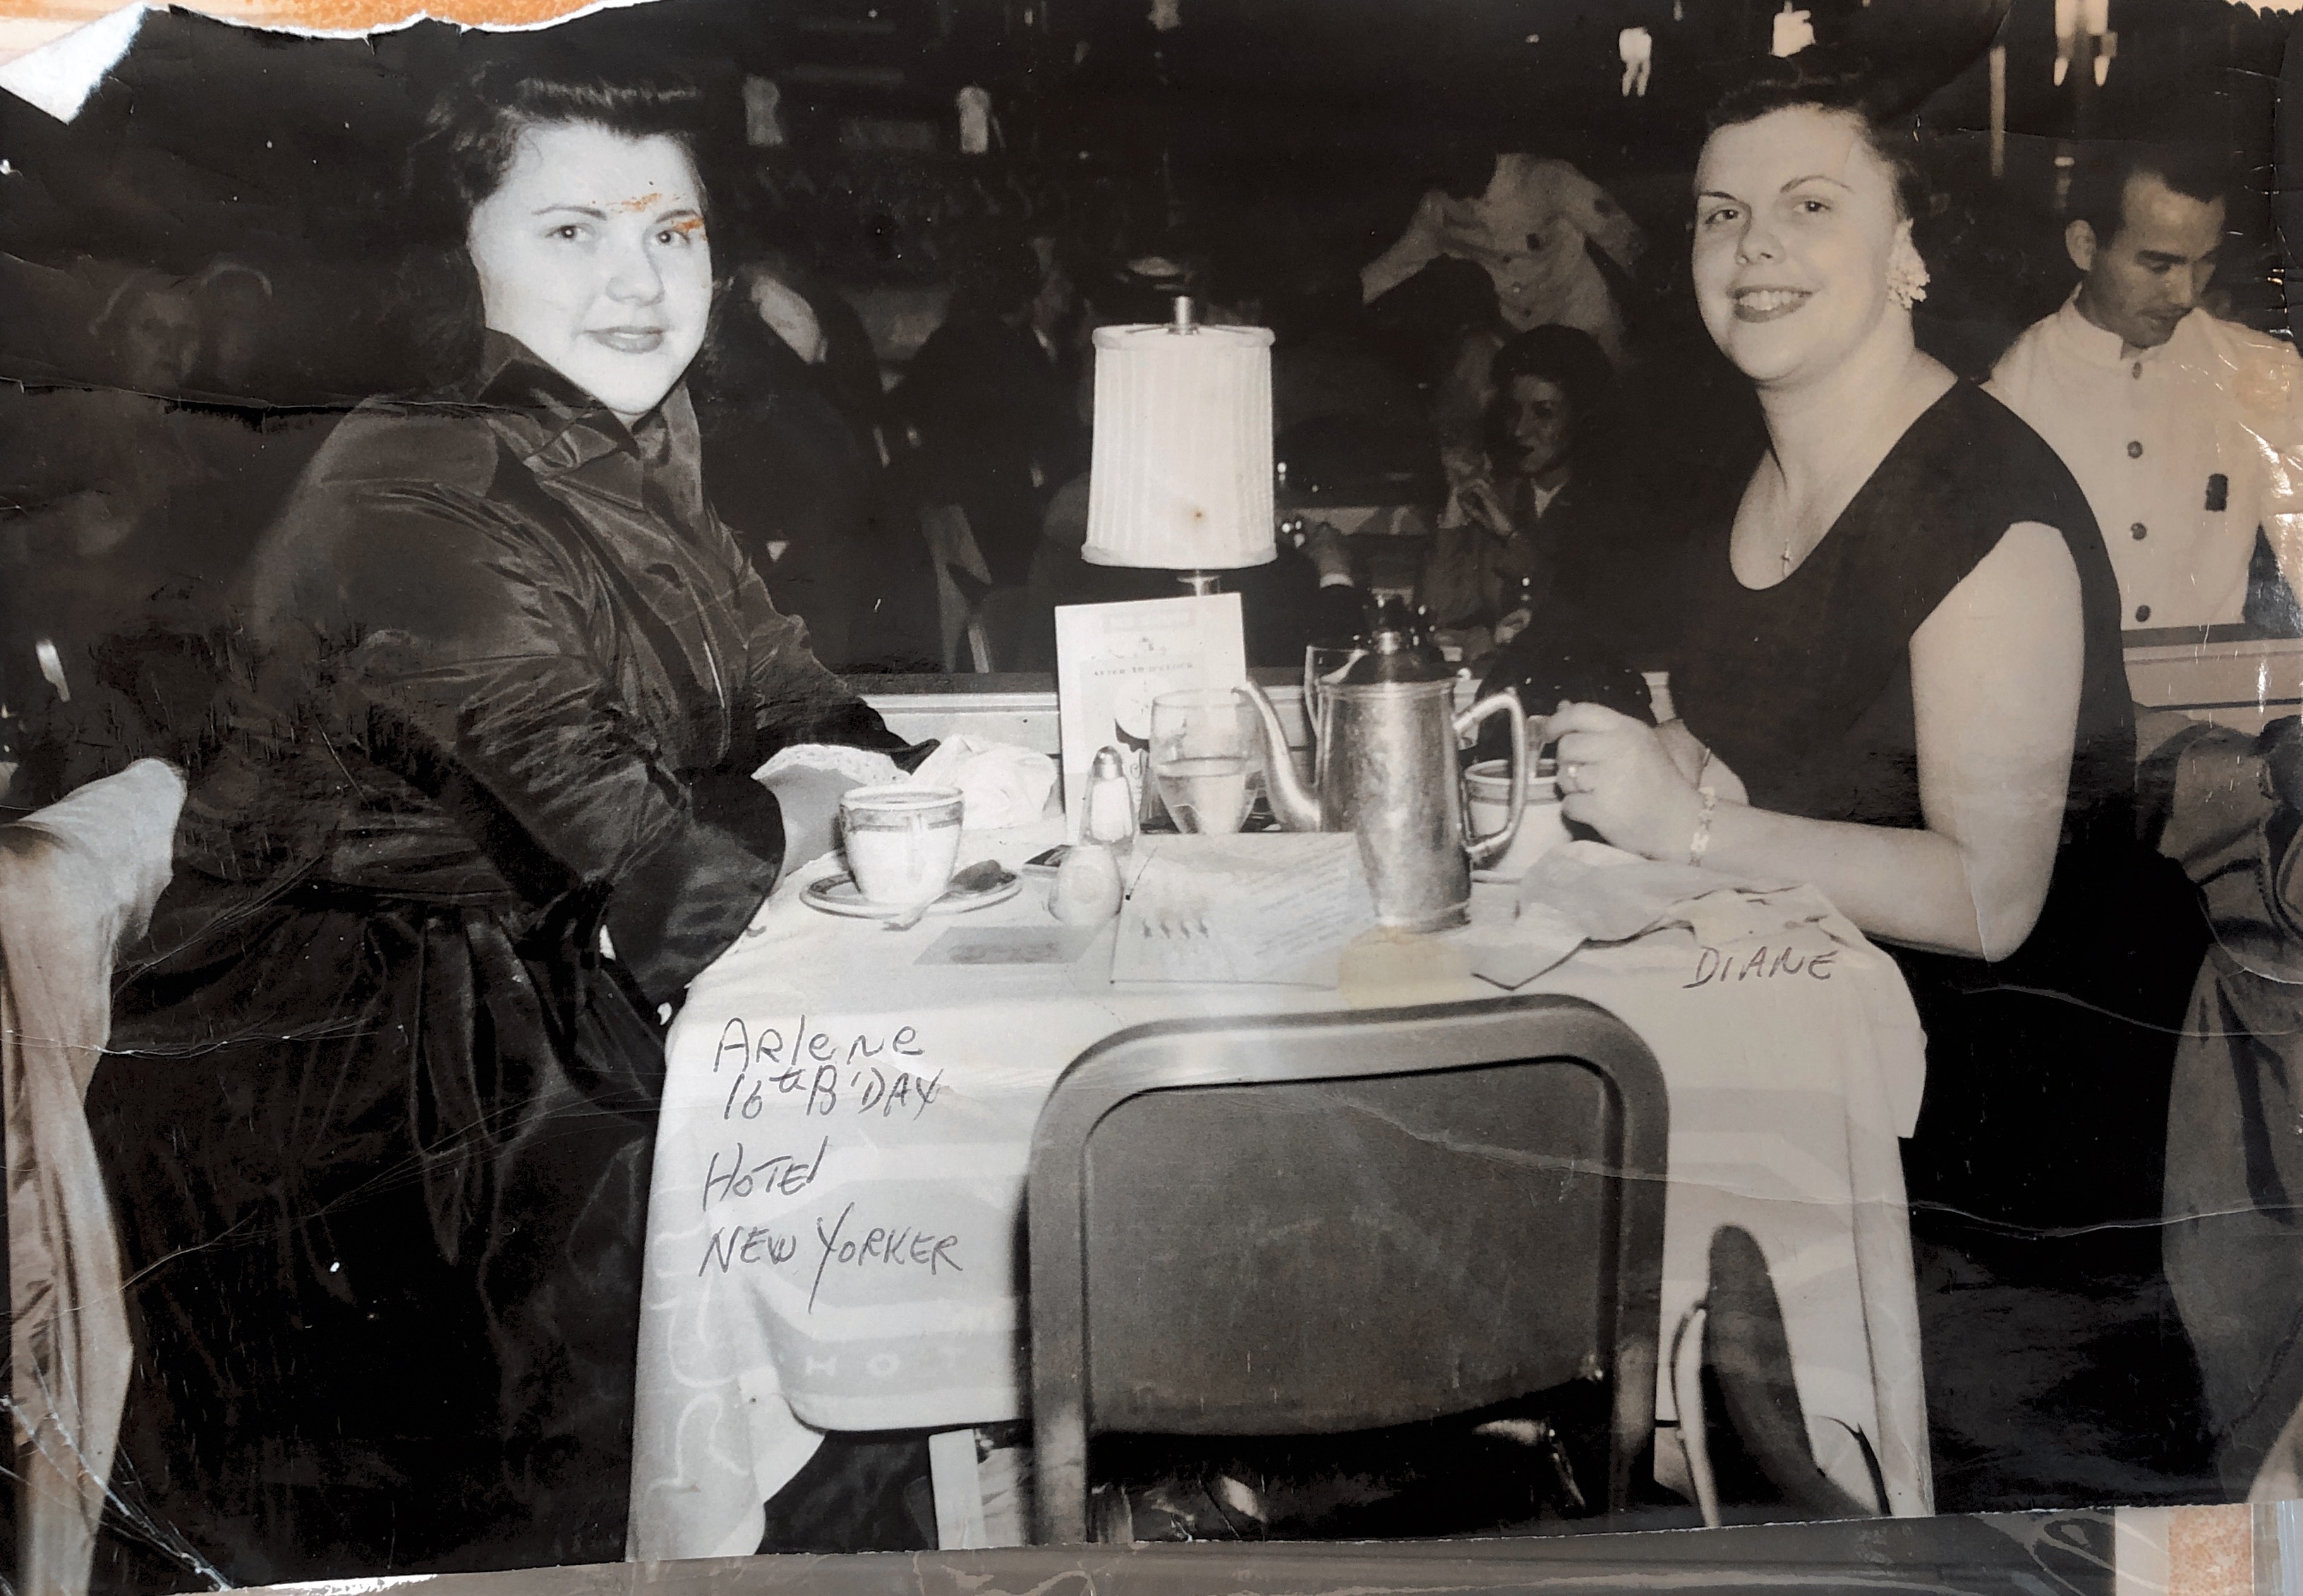 Arlene‘s 16th birthday at the hotel New Yorker with her big sister, Diane
June 12, 1952